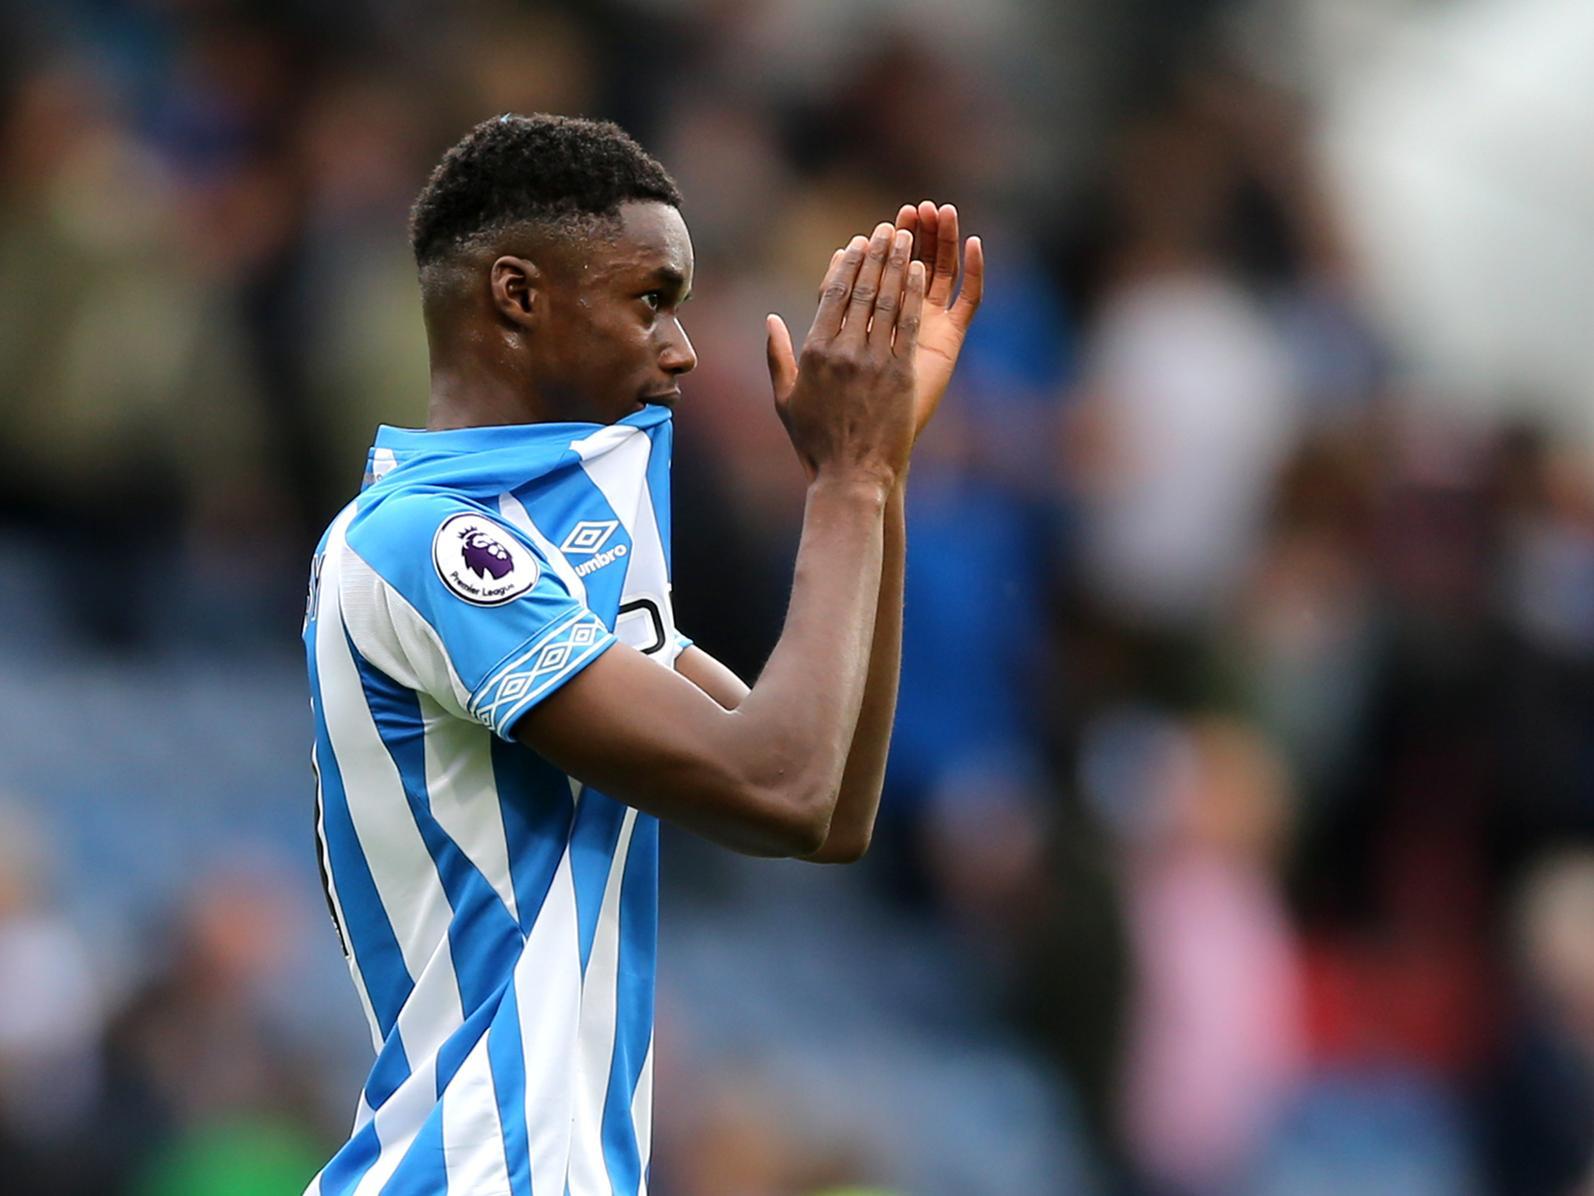 Nottingham Forest look to be edging closer to agreeing a loan move for Huddersfield Town winger Adama Diakhaby, who has failed to impress since joining from Monaco in 2018. (Nottingham Post)